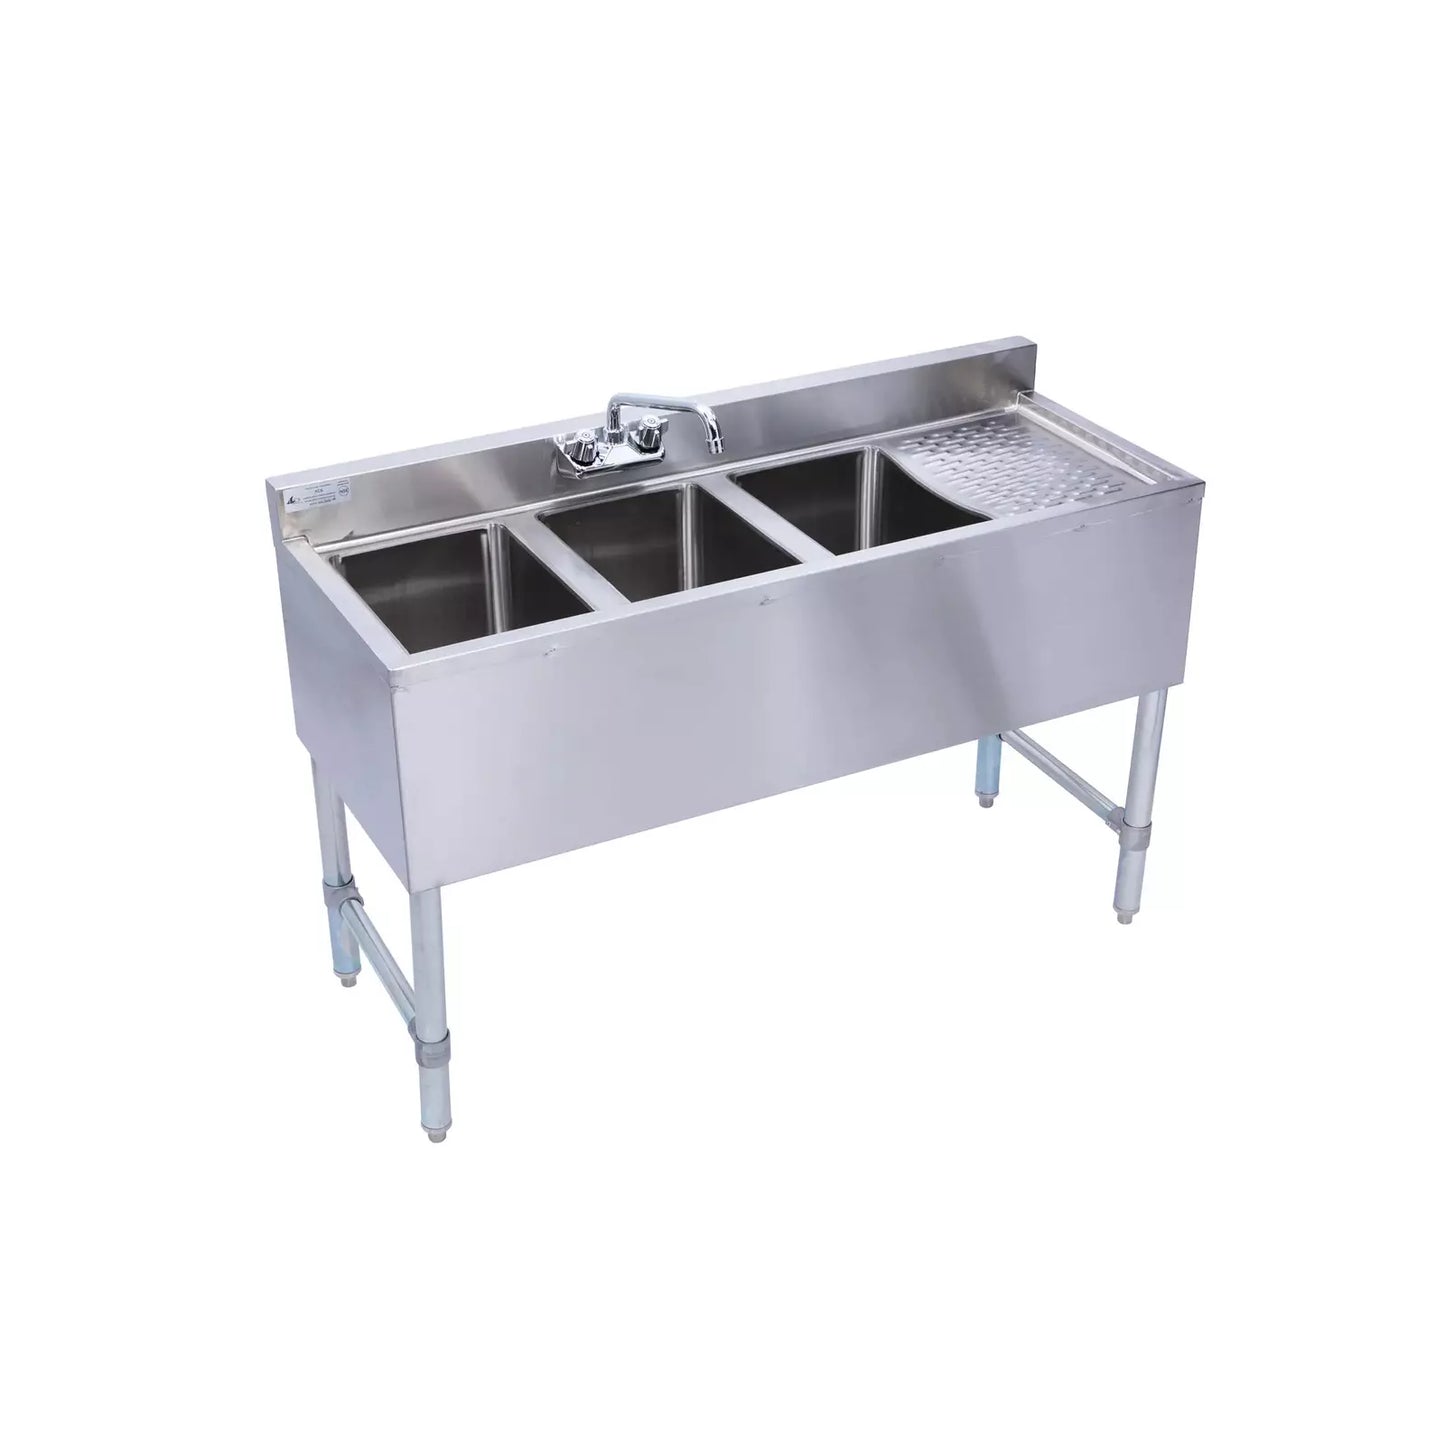 KCS BS4-3R 48" Wide Three Bowl Under Bar Hand Sink With Swivel Faucet with Right Drainboard